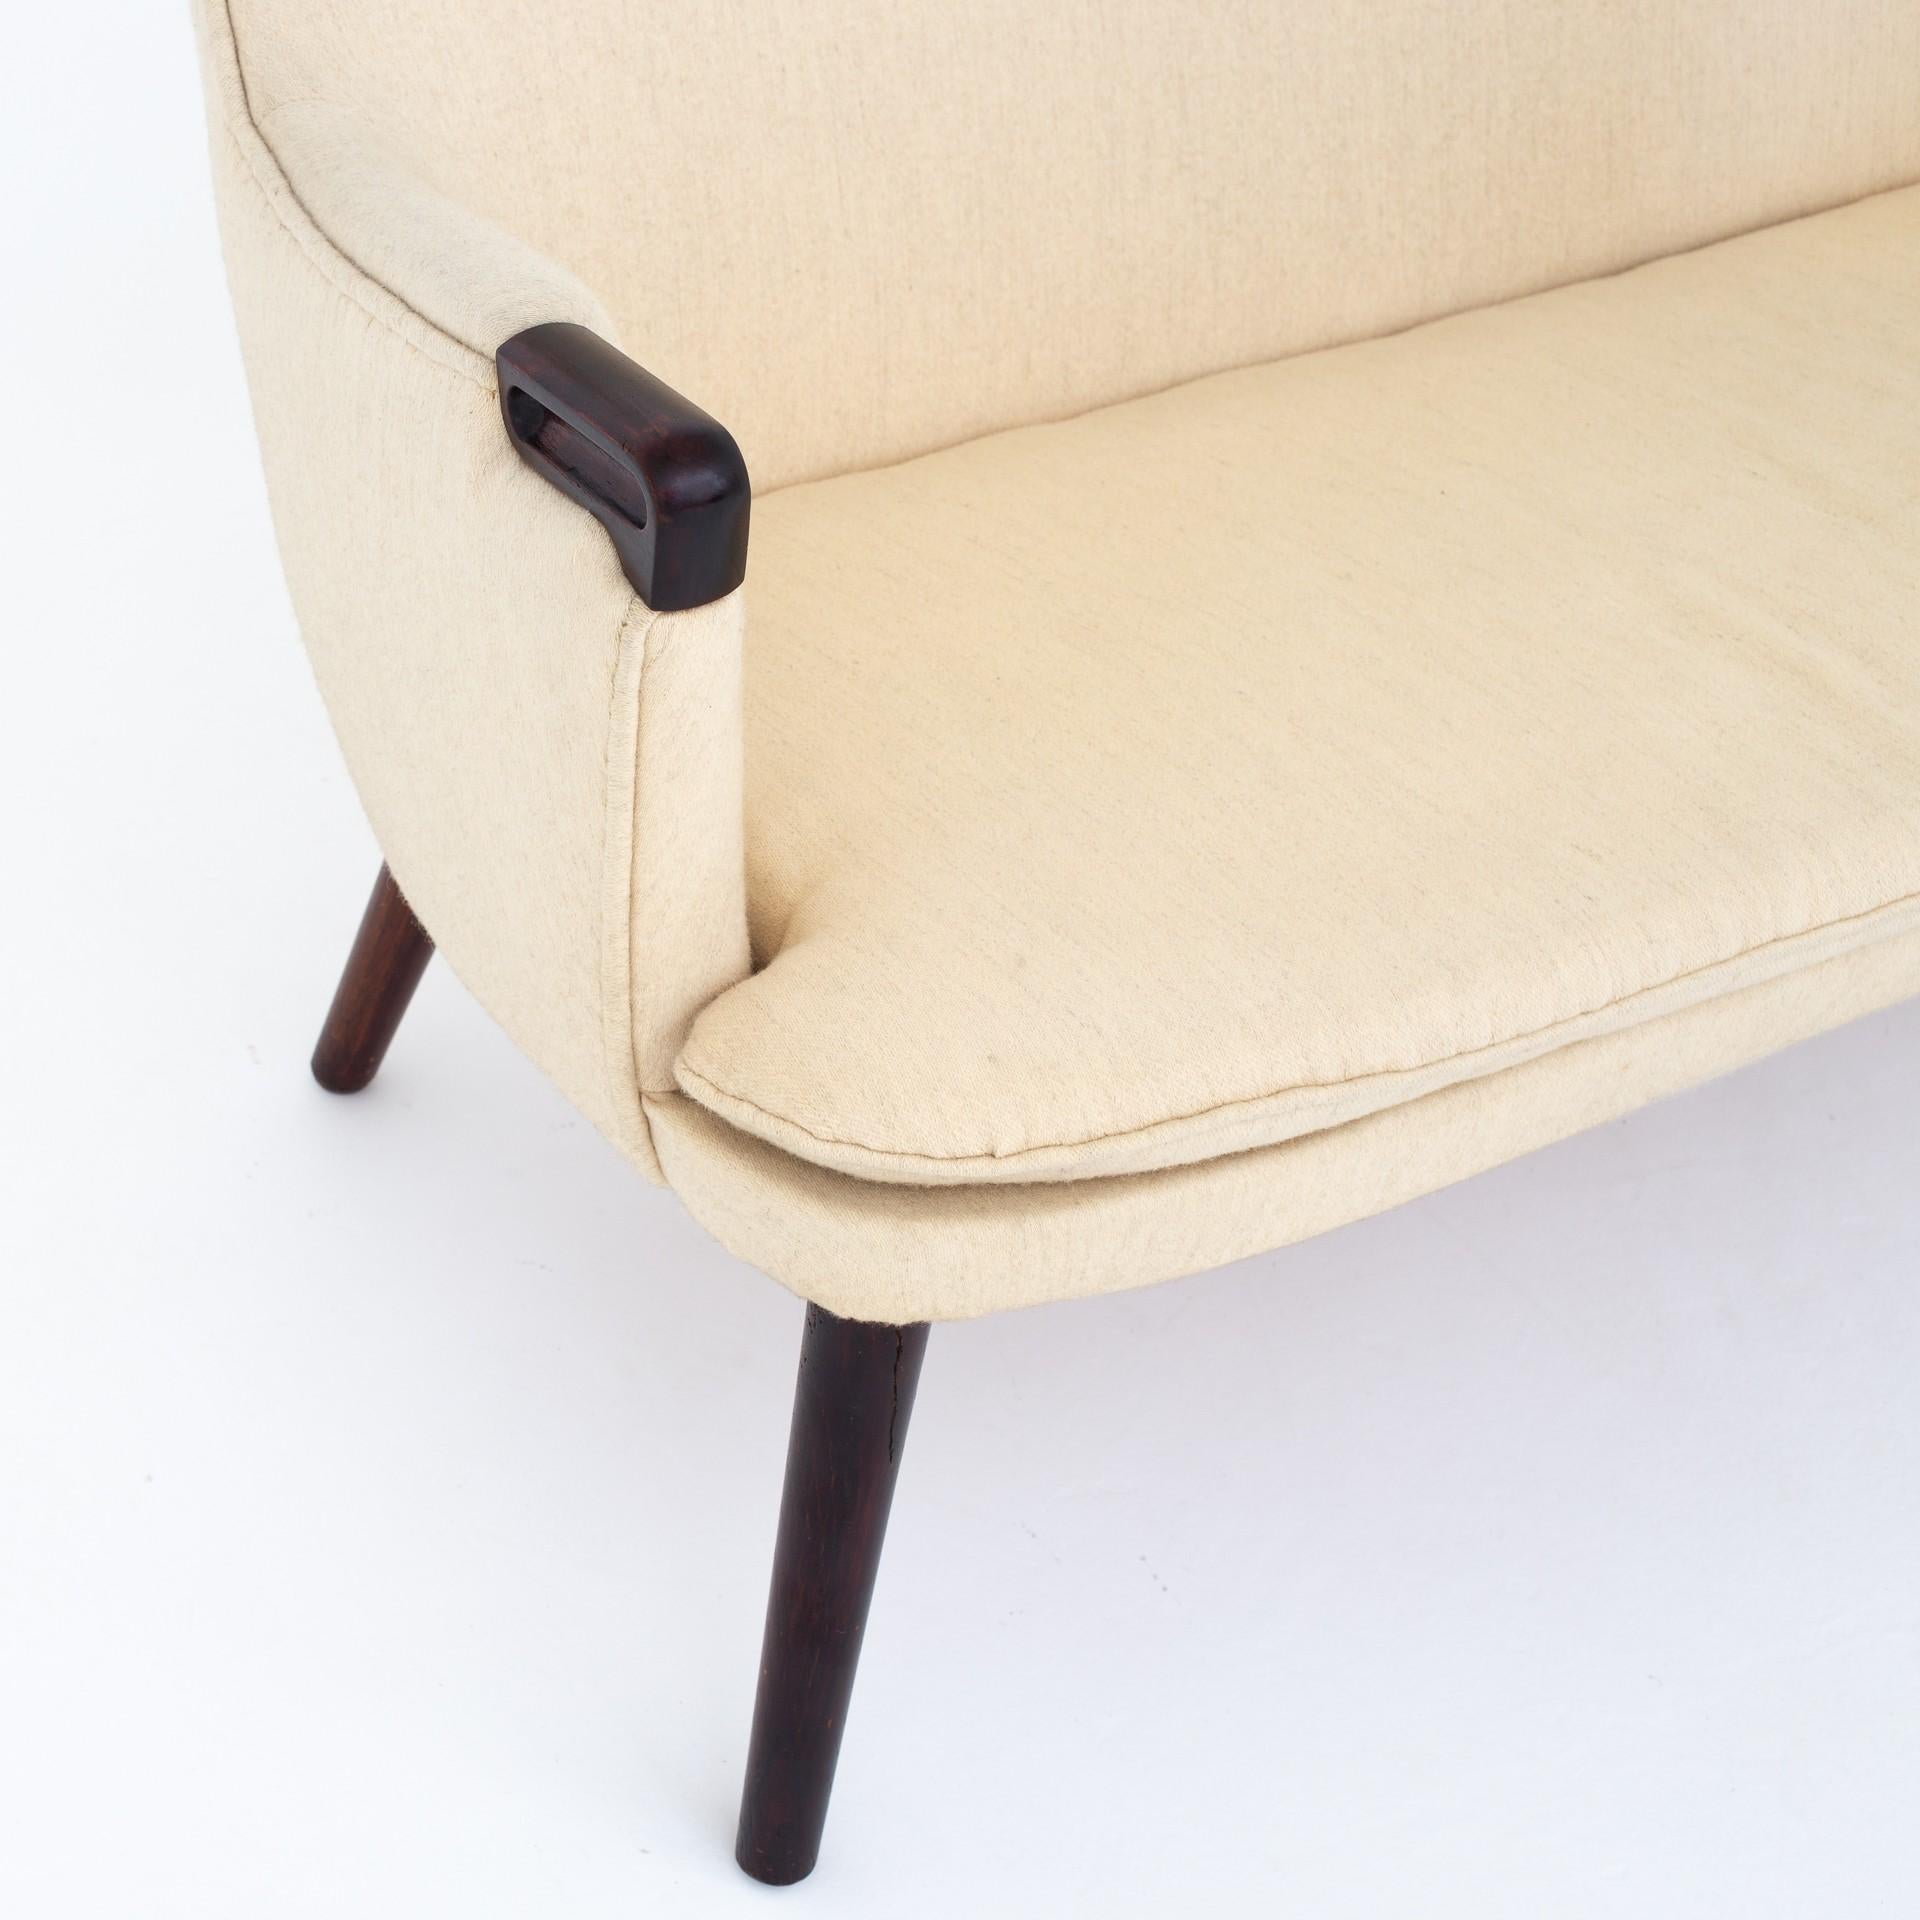 Stained AP 20, Two-Seat by Hans J. Wegner